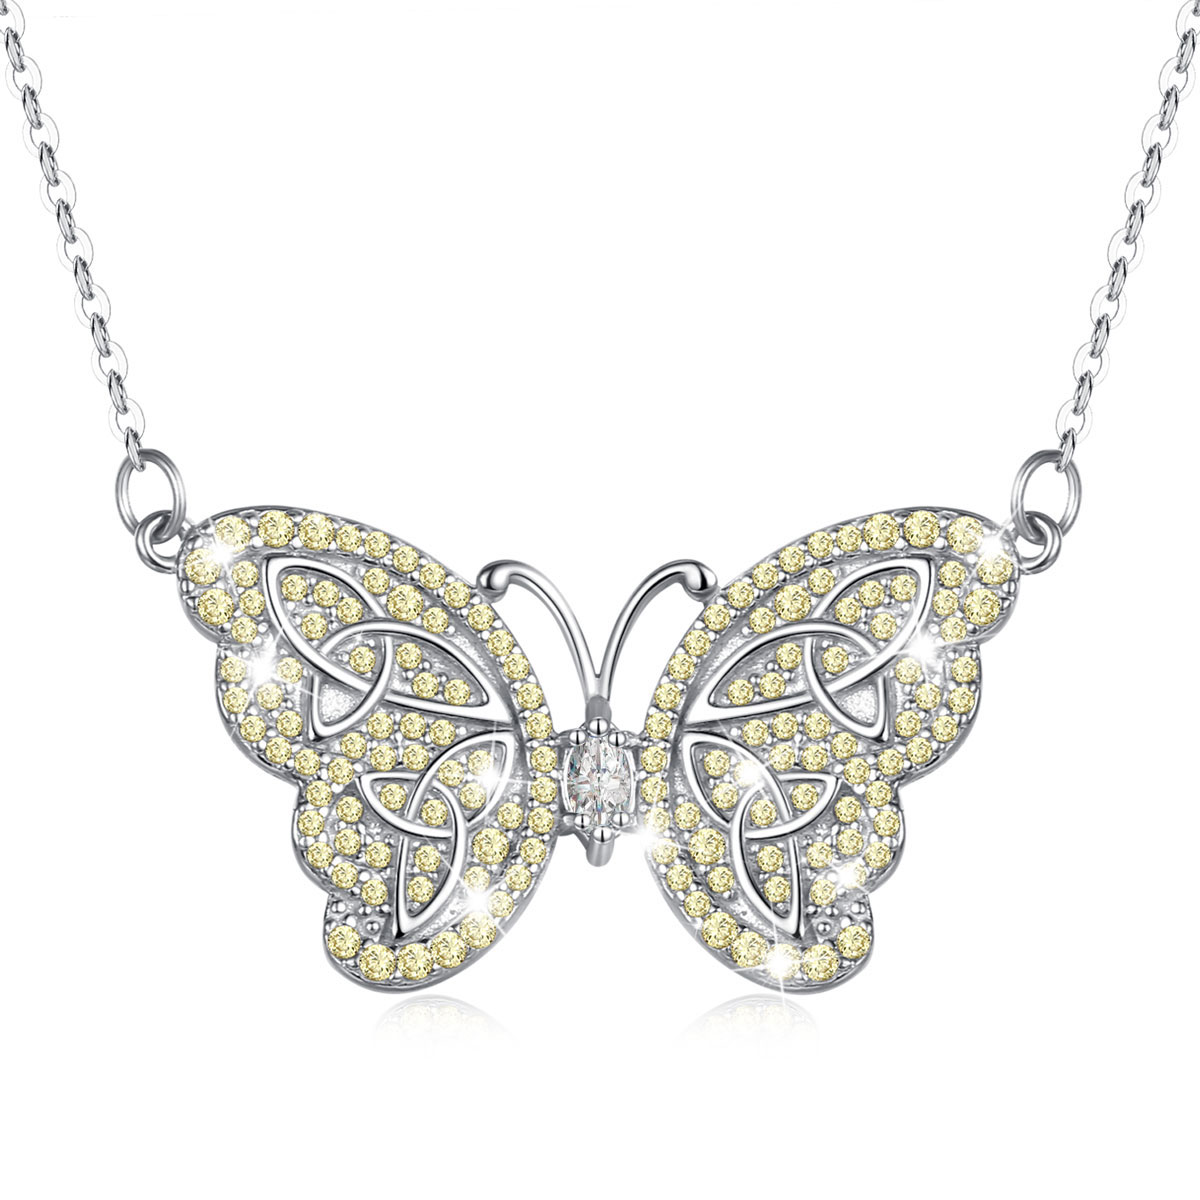 Merryshine Senior jewelry 925 sterling silver dainty butterfly shaped pendant necklace